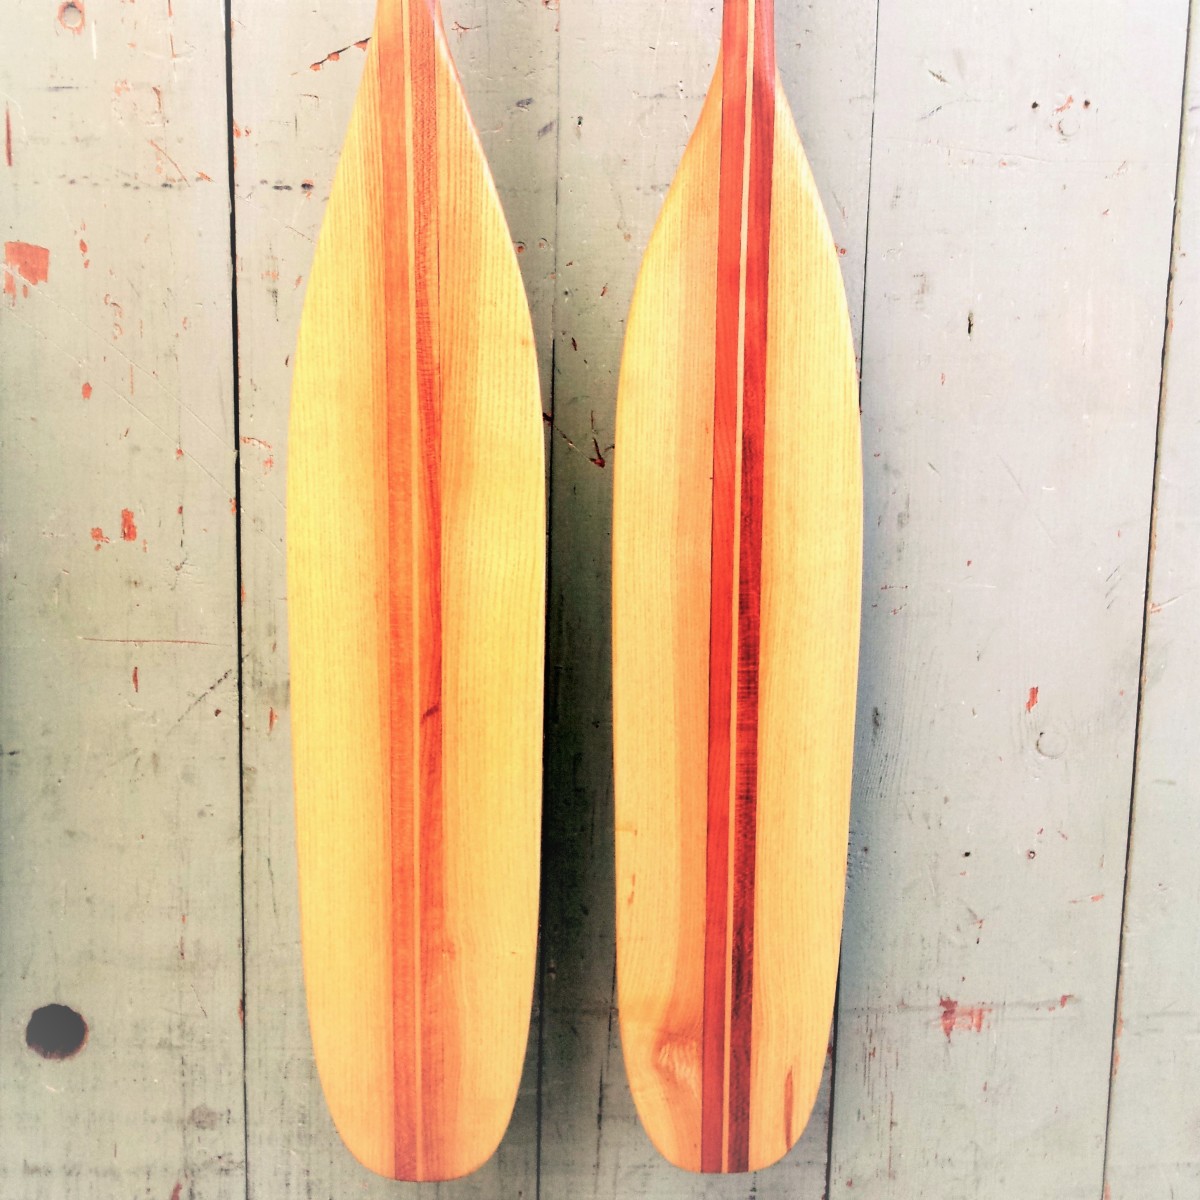 Cherry and Ash Canoe Paddles